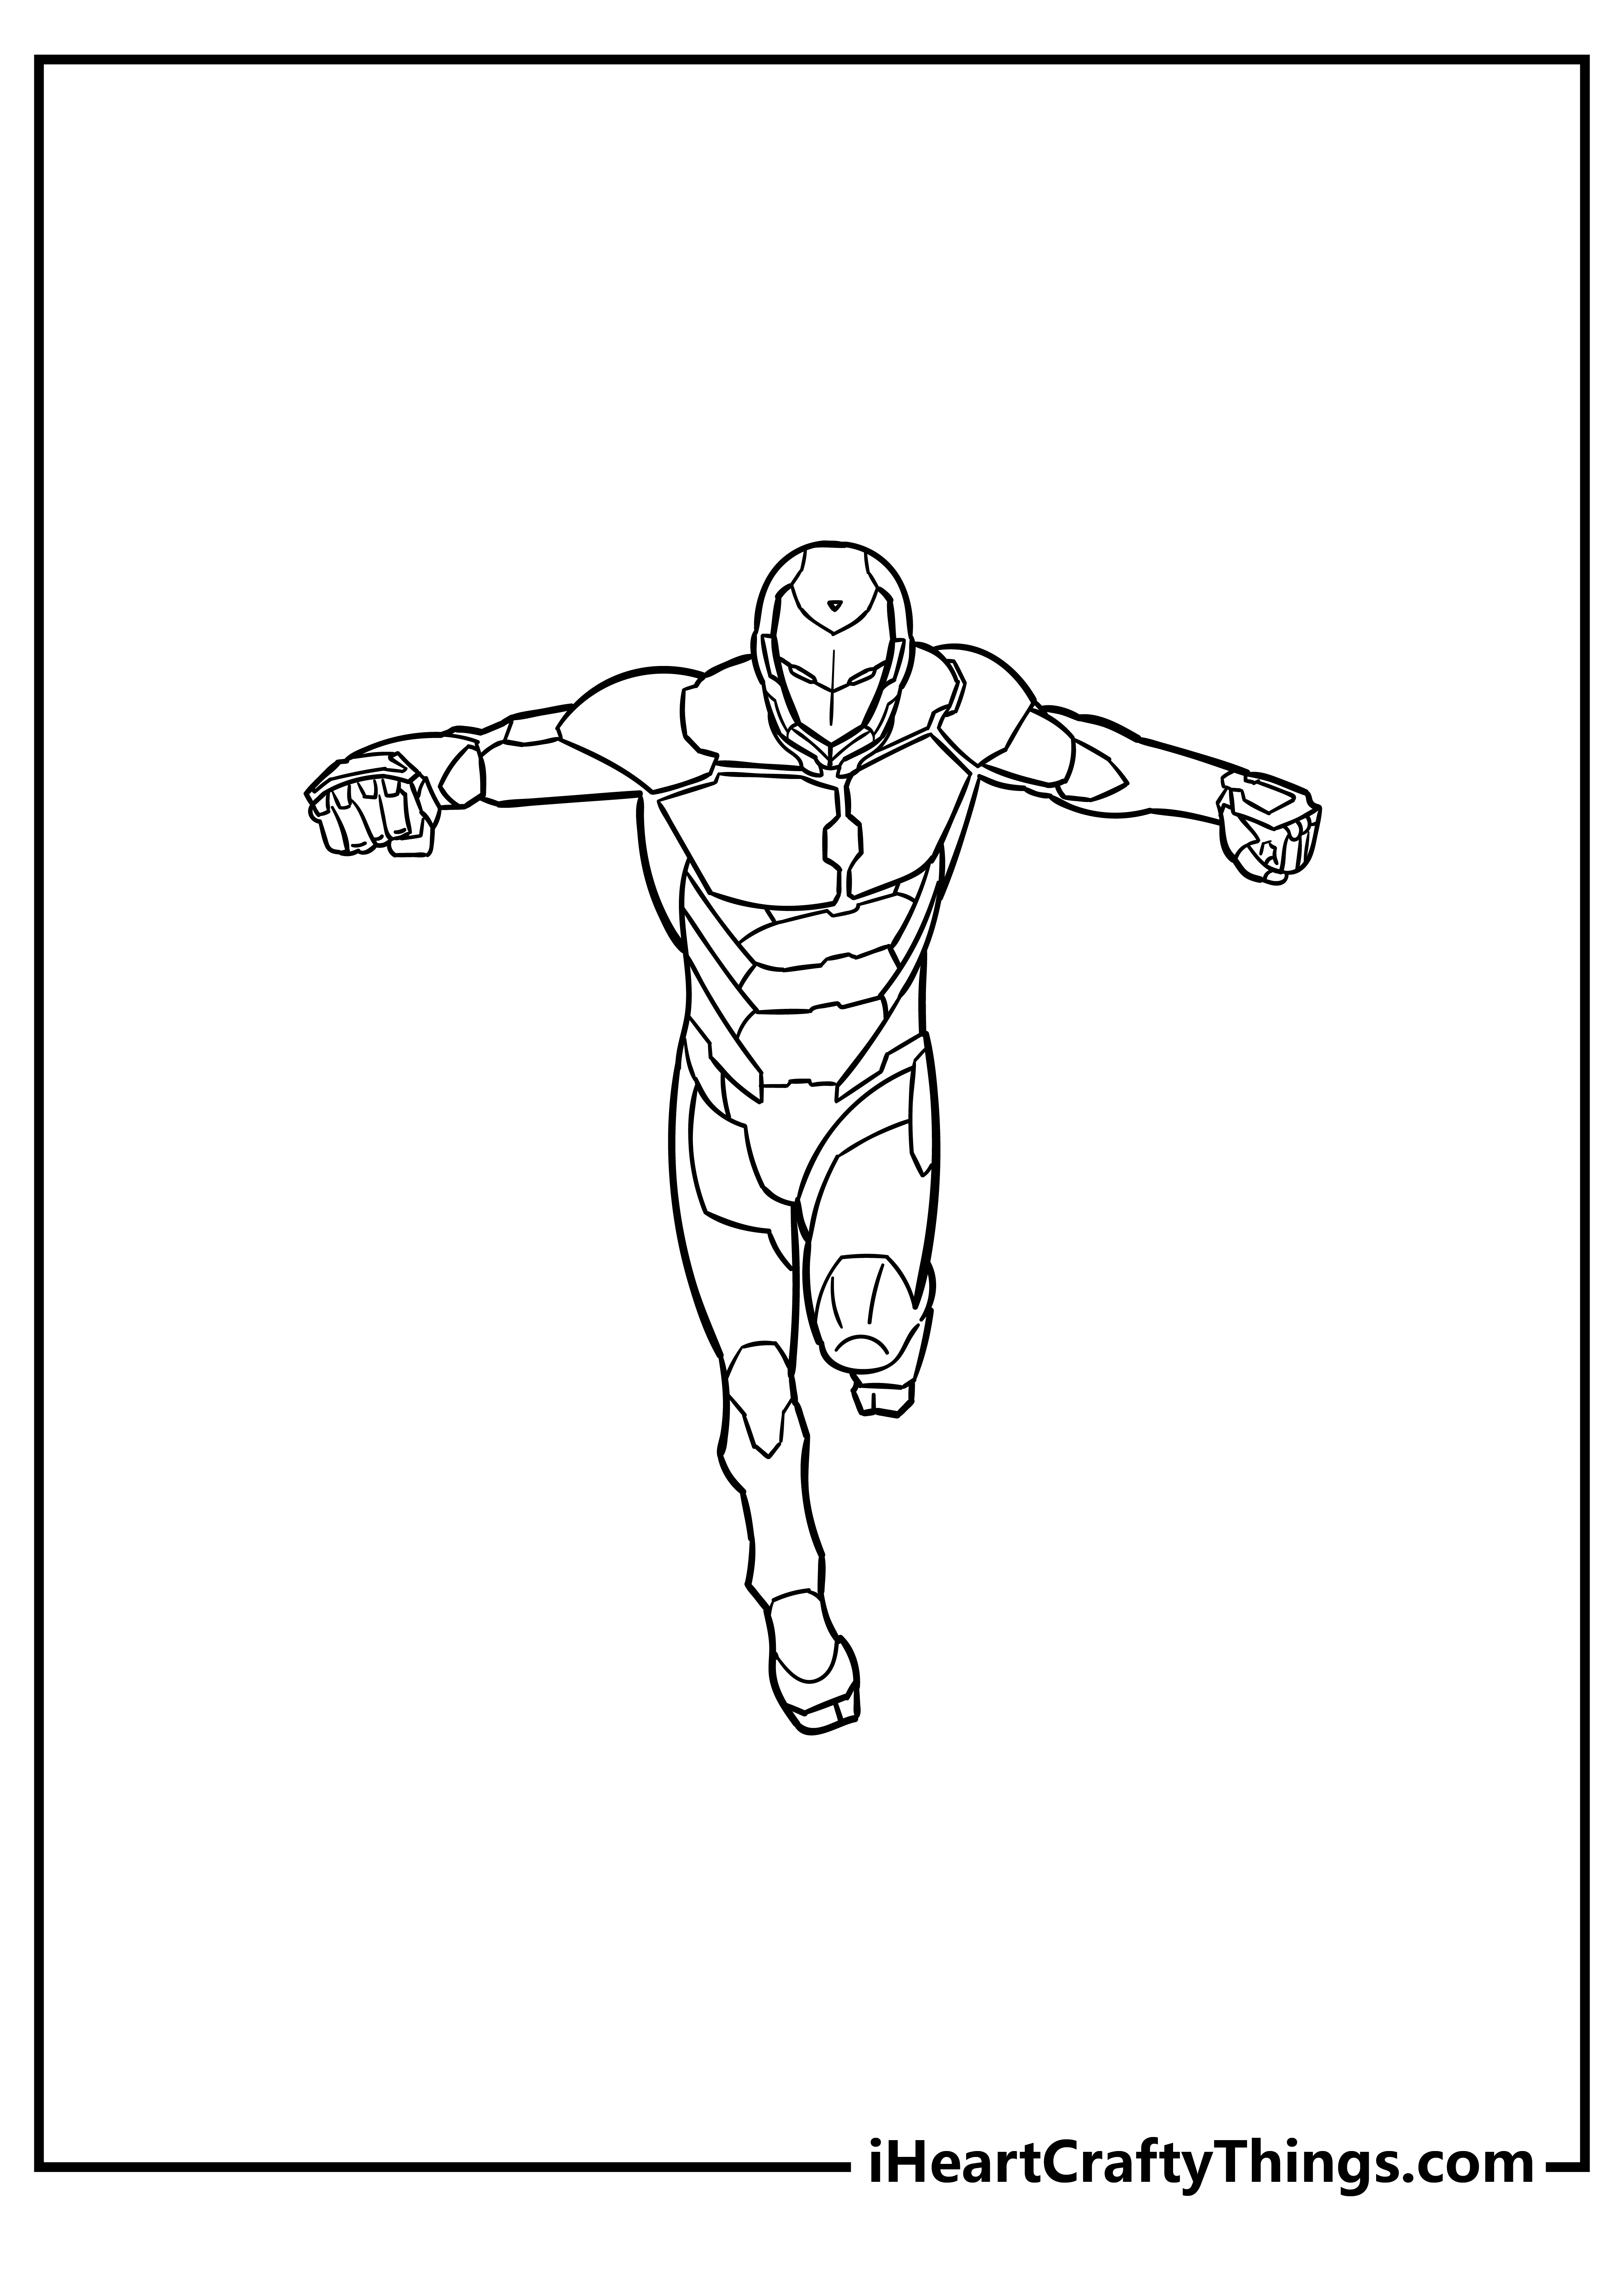 Printable Iron Man Coloring Pages Updated 20